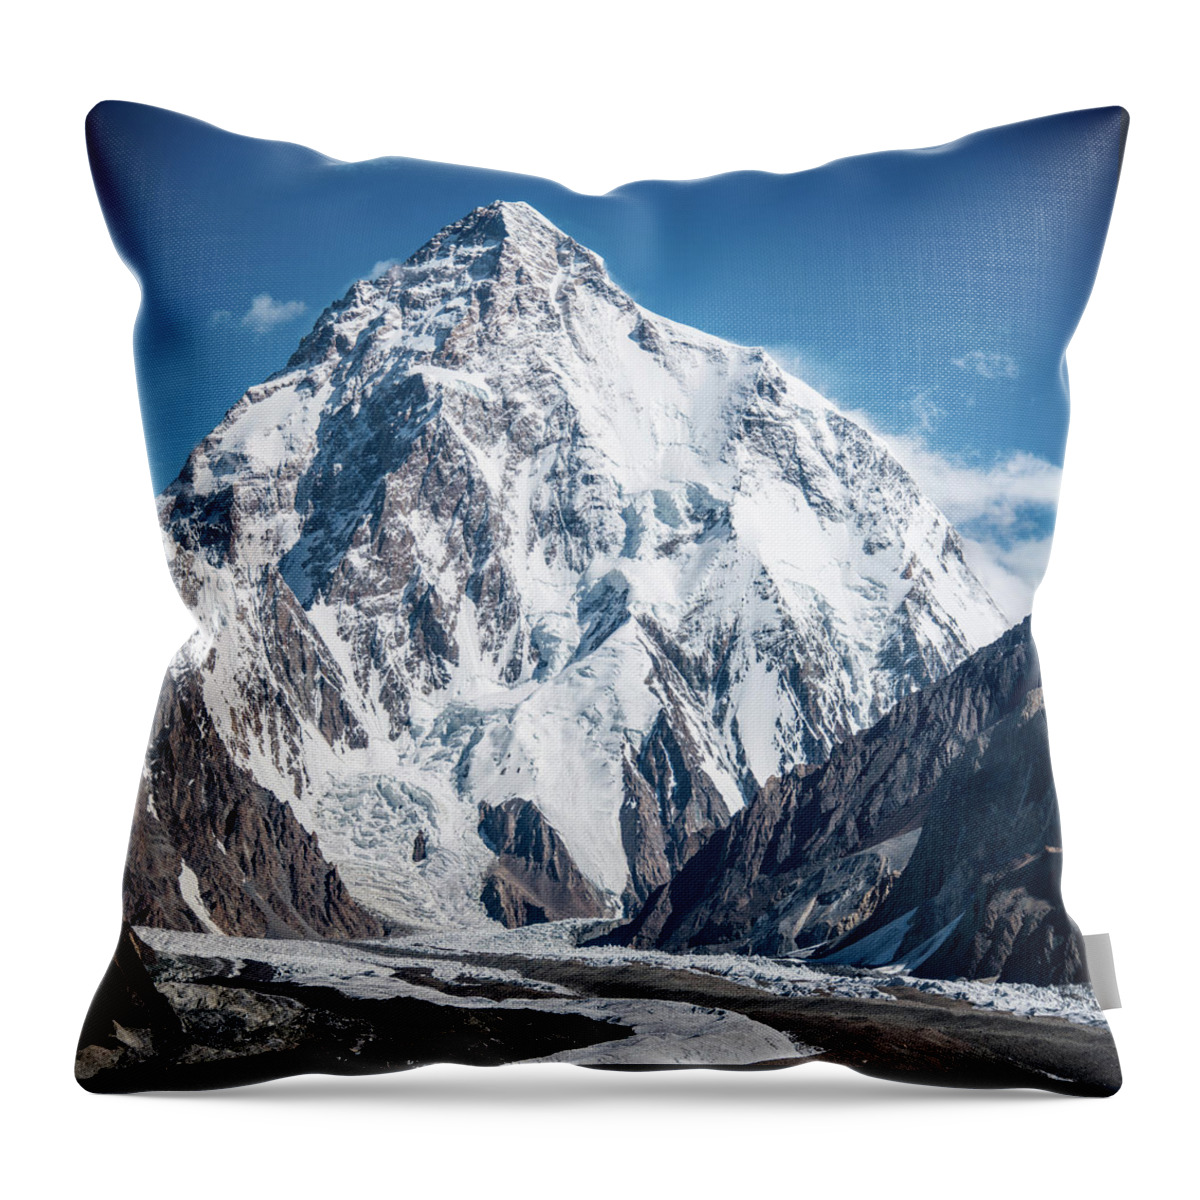 Mountain Throw Pillow featuring the photograph K2 8611 by Jose Lorente